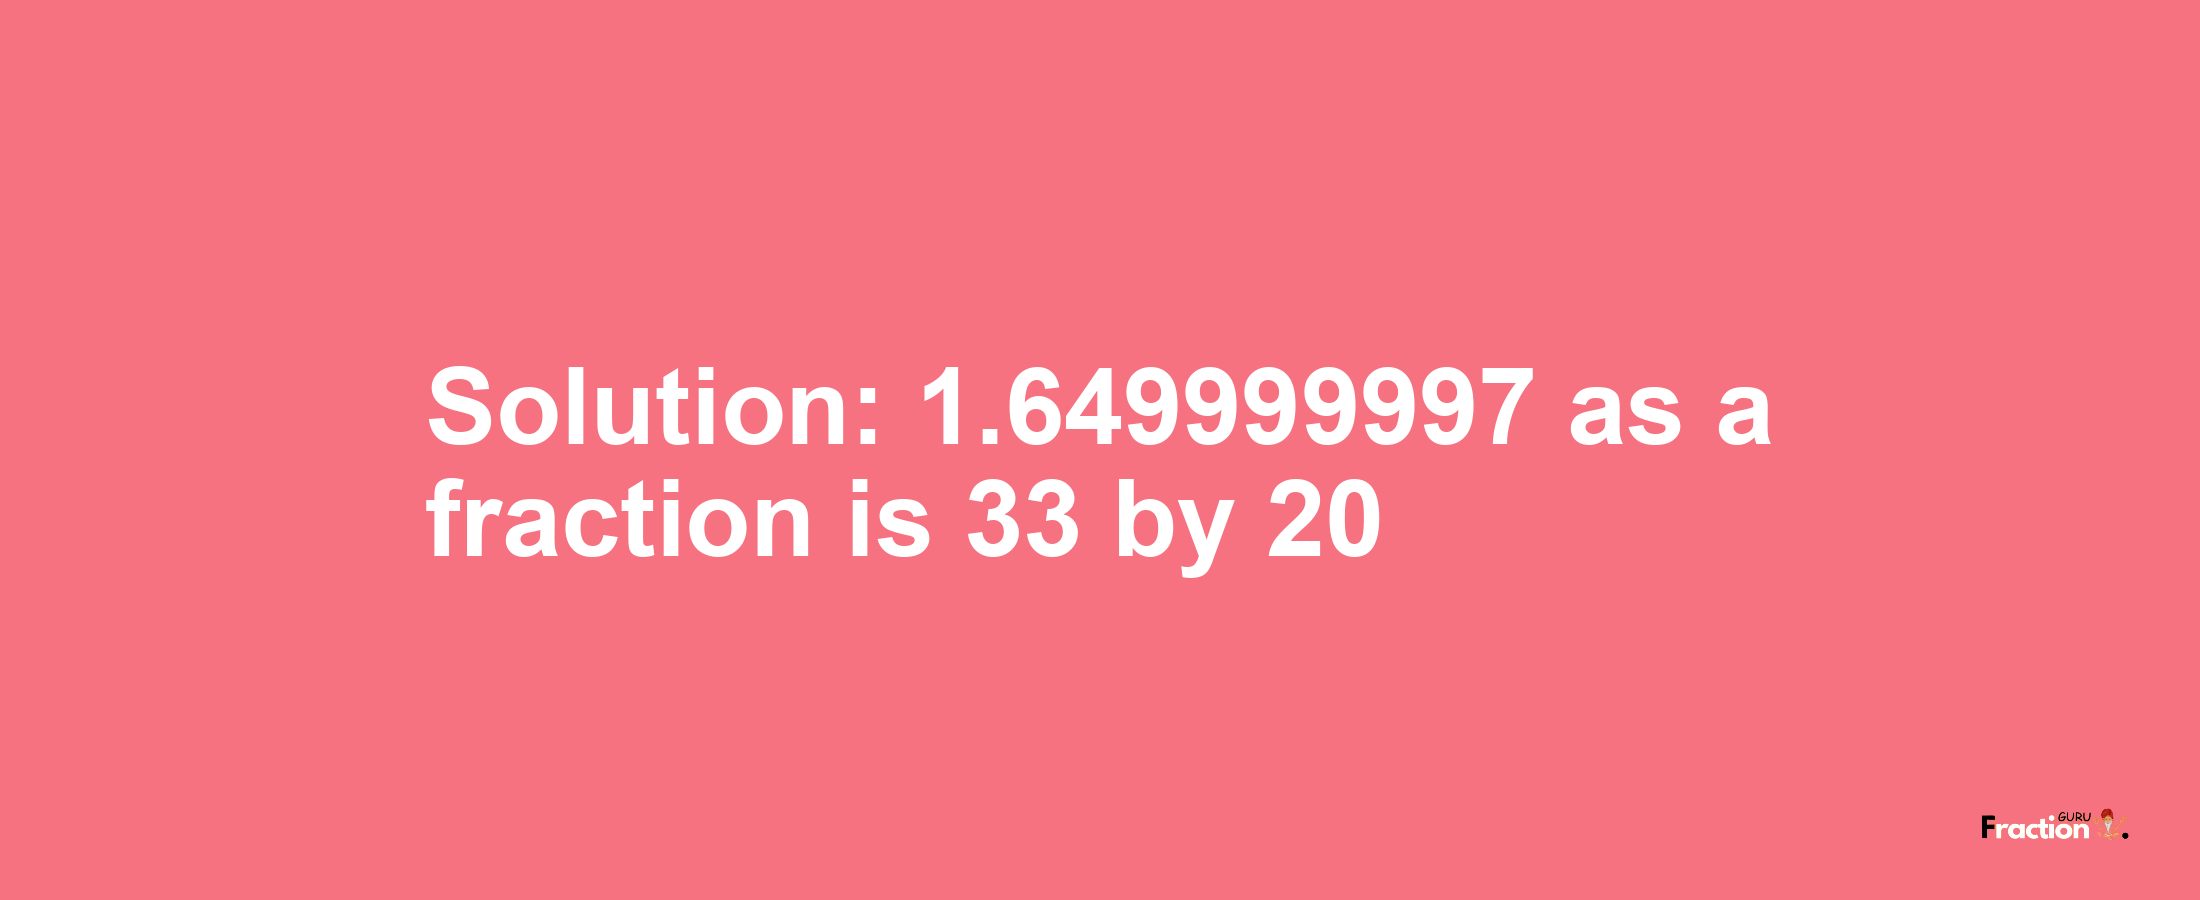 Solution:1.649999997 as a fraction is 33/20